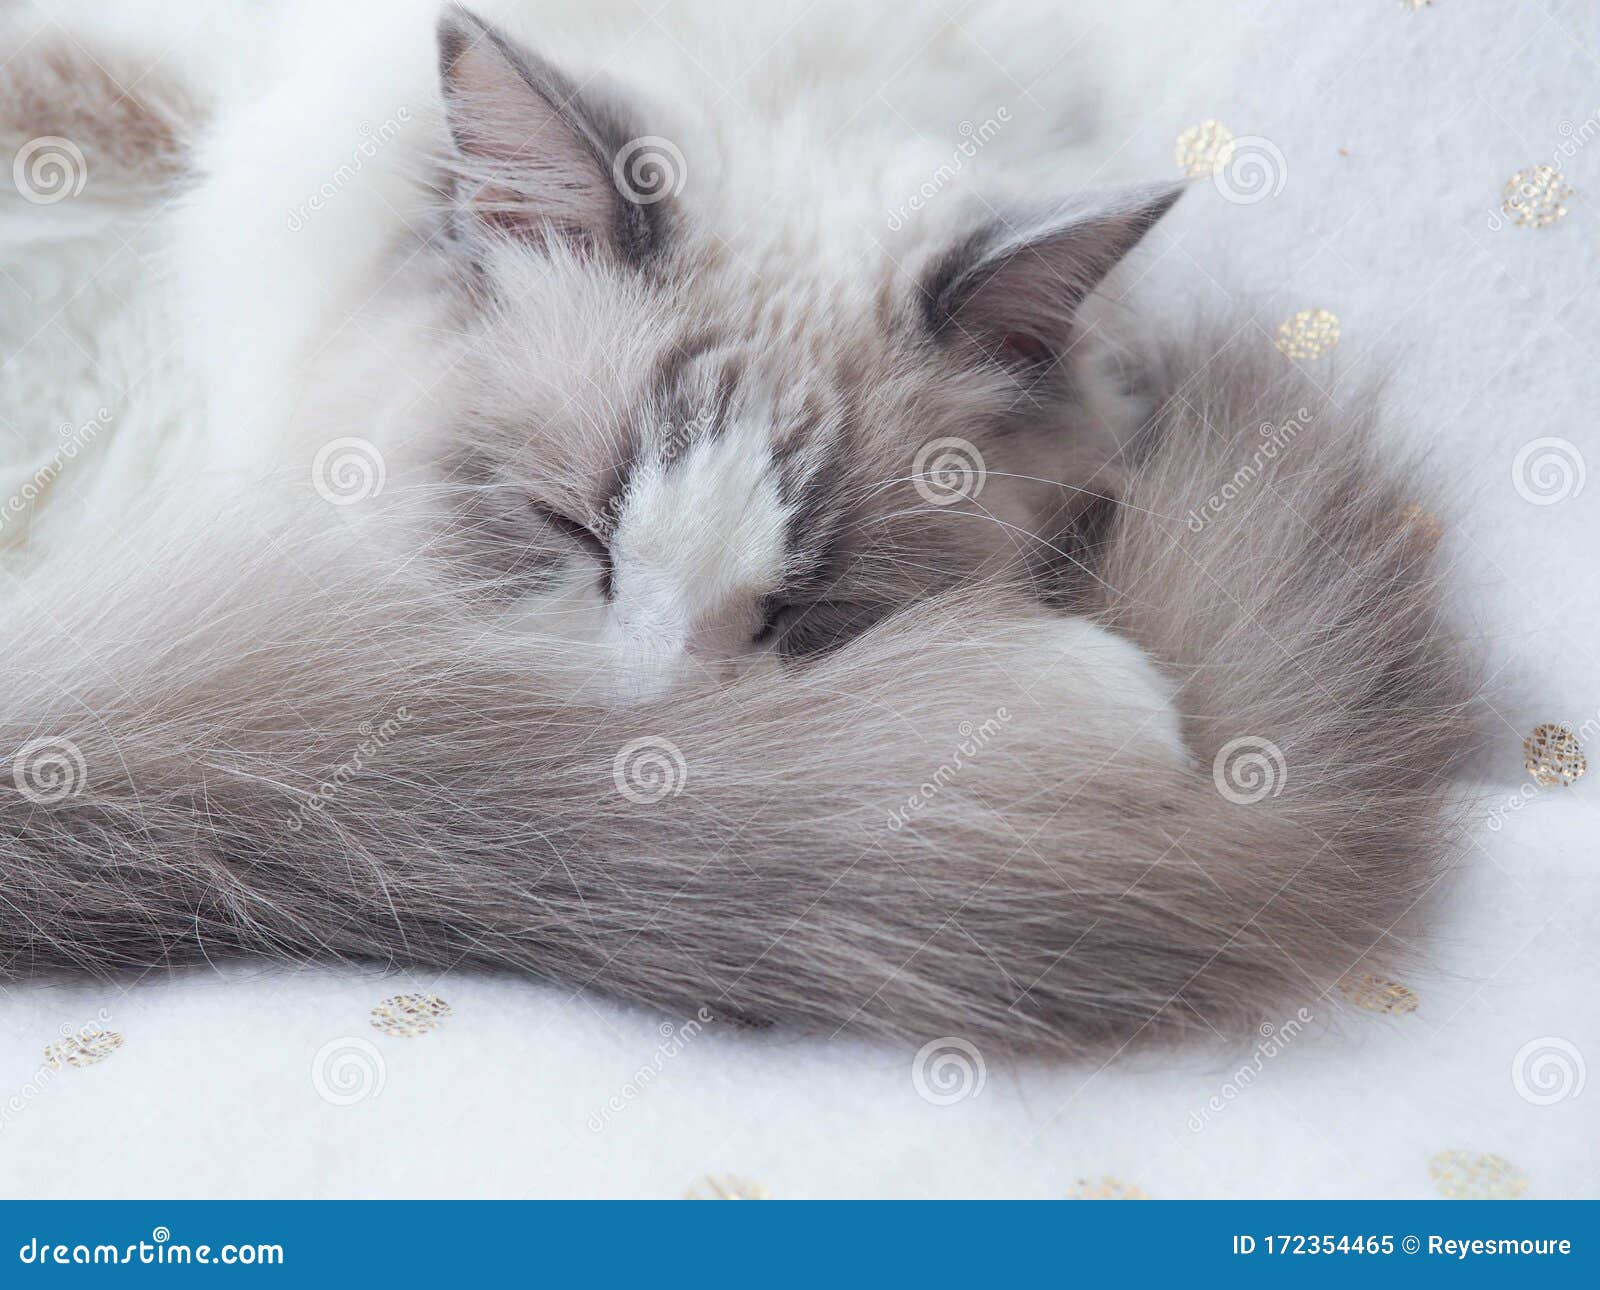 Adorable Ragdoll Cat With Fluffy Grey Tail Stock Image Image Of Cutest Huella 172354465